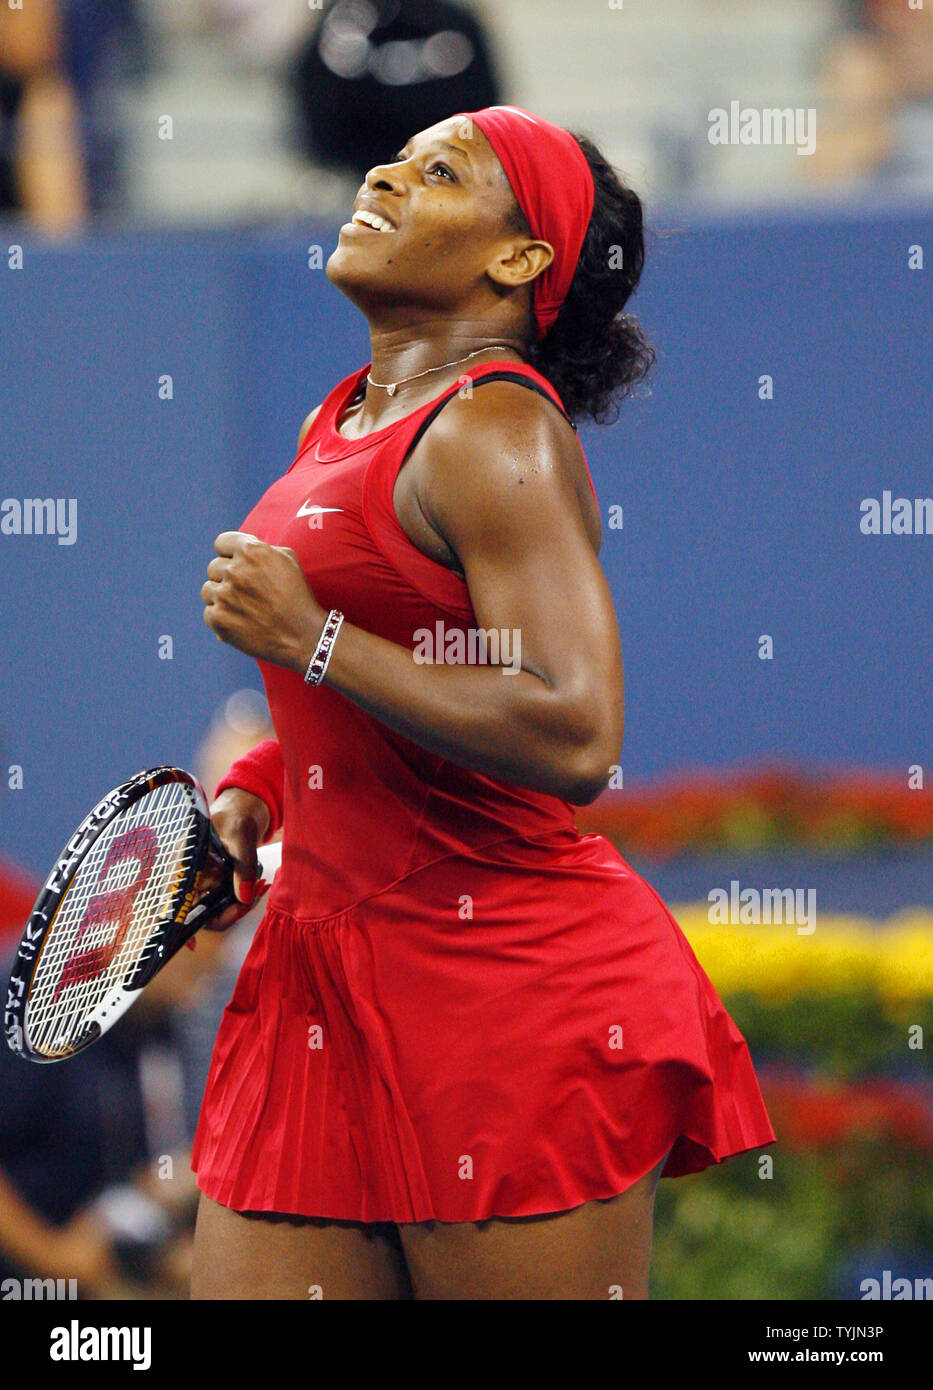 Serena Williams reacts after match point in her match against Severine Bremond on day eight at the U.S. Open Tennis Championships at the U.S. National Tennis Center in Flushing Meadows, New York on September 1, 2008. Williams defeated Bremond 6-2 6-2.         (UPI Photo/John Angelillo) Stock Photo